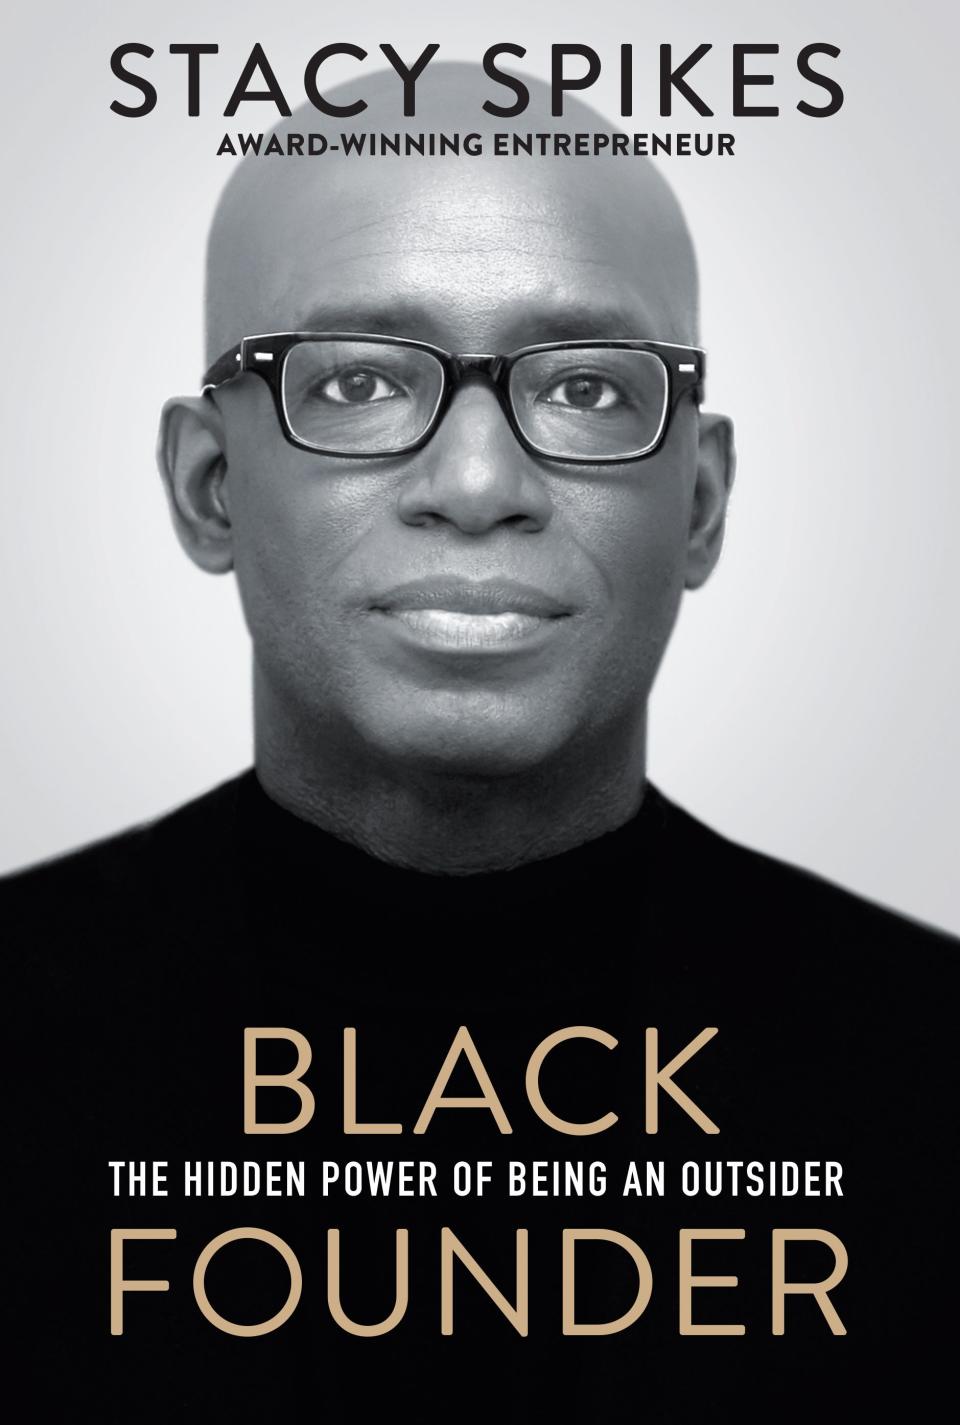 Book Cover for Black Founder by Stacy Spikes